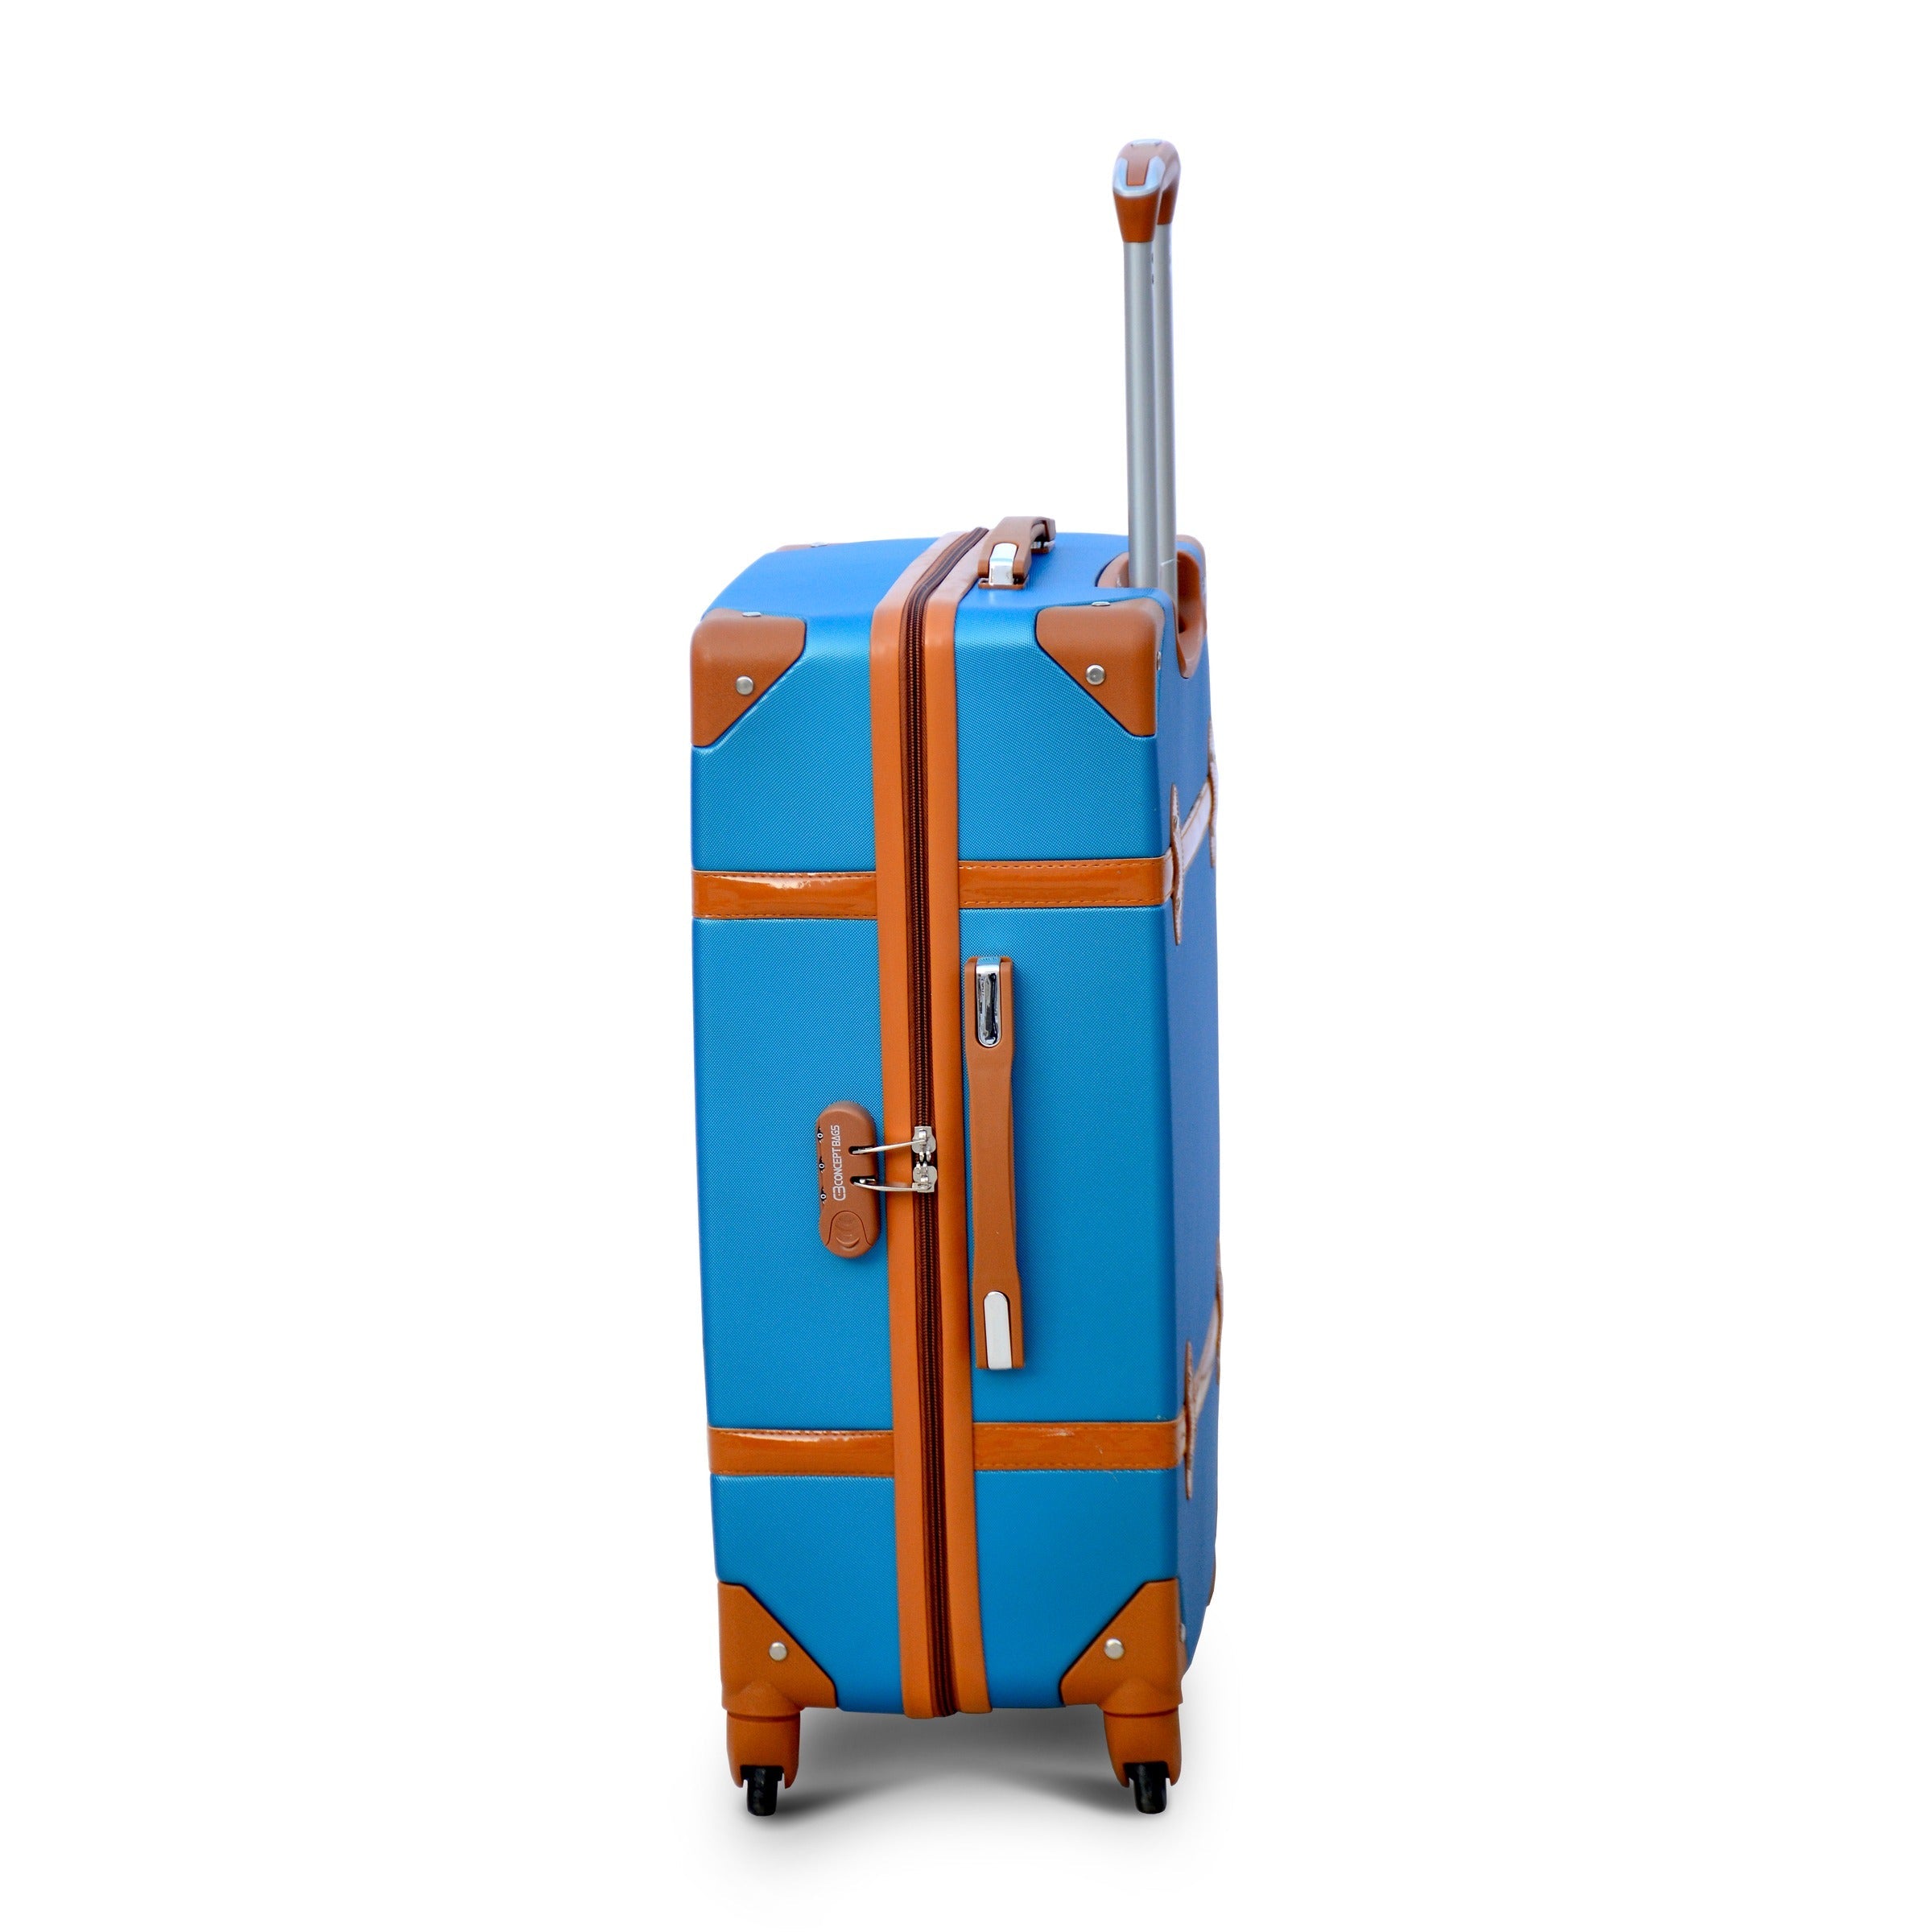 24" Blue and Brown Corner Guard ABS Lightweight Luggage Bag With Spinner Wheel